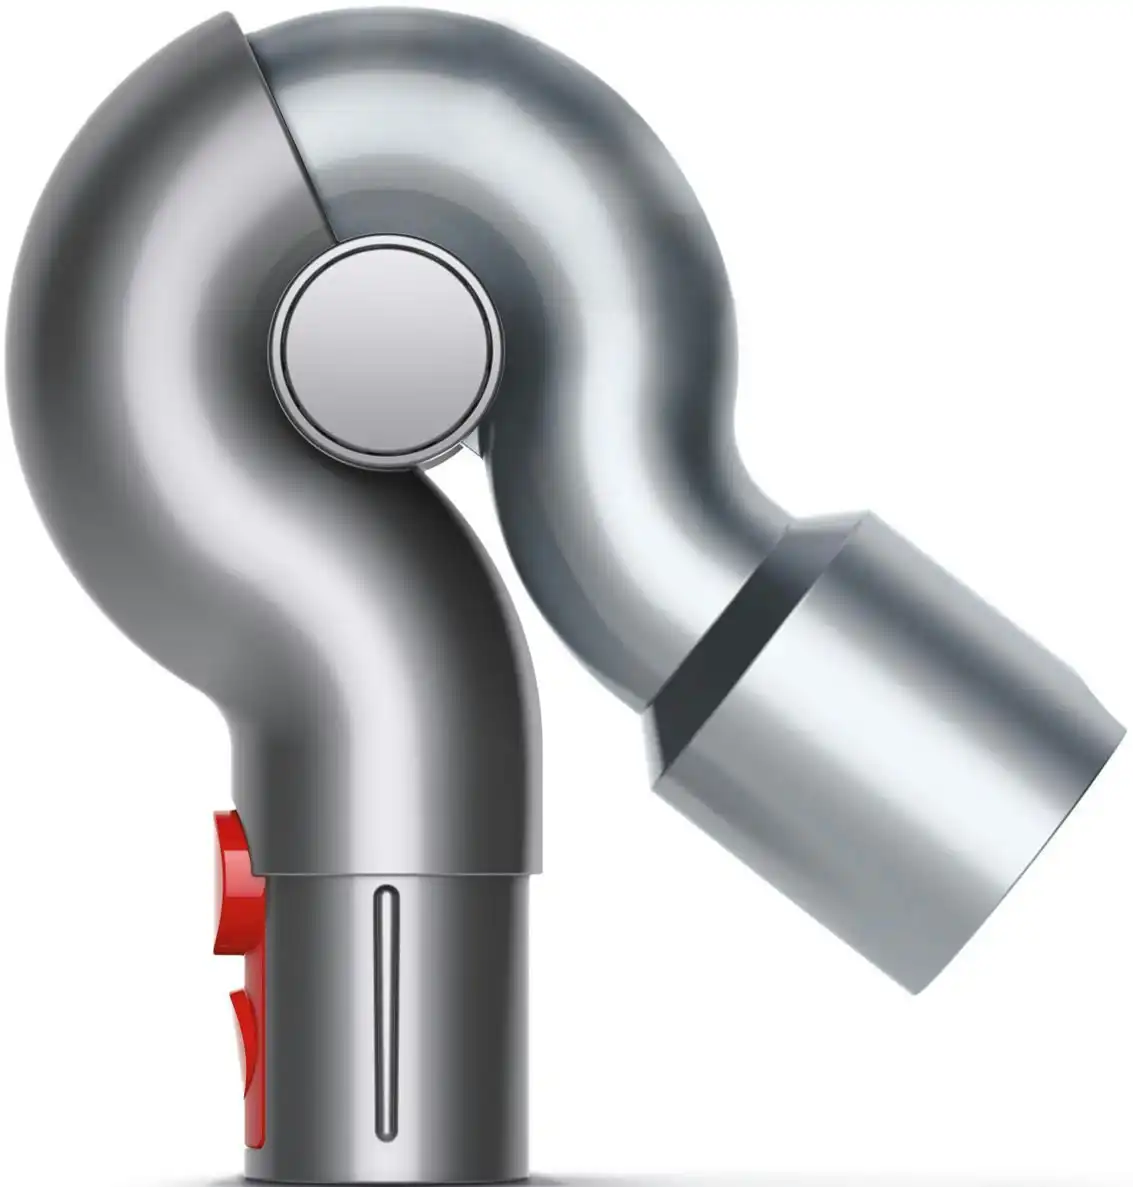 Dyson Quick Release Up Top Adapter for V7 and V8